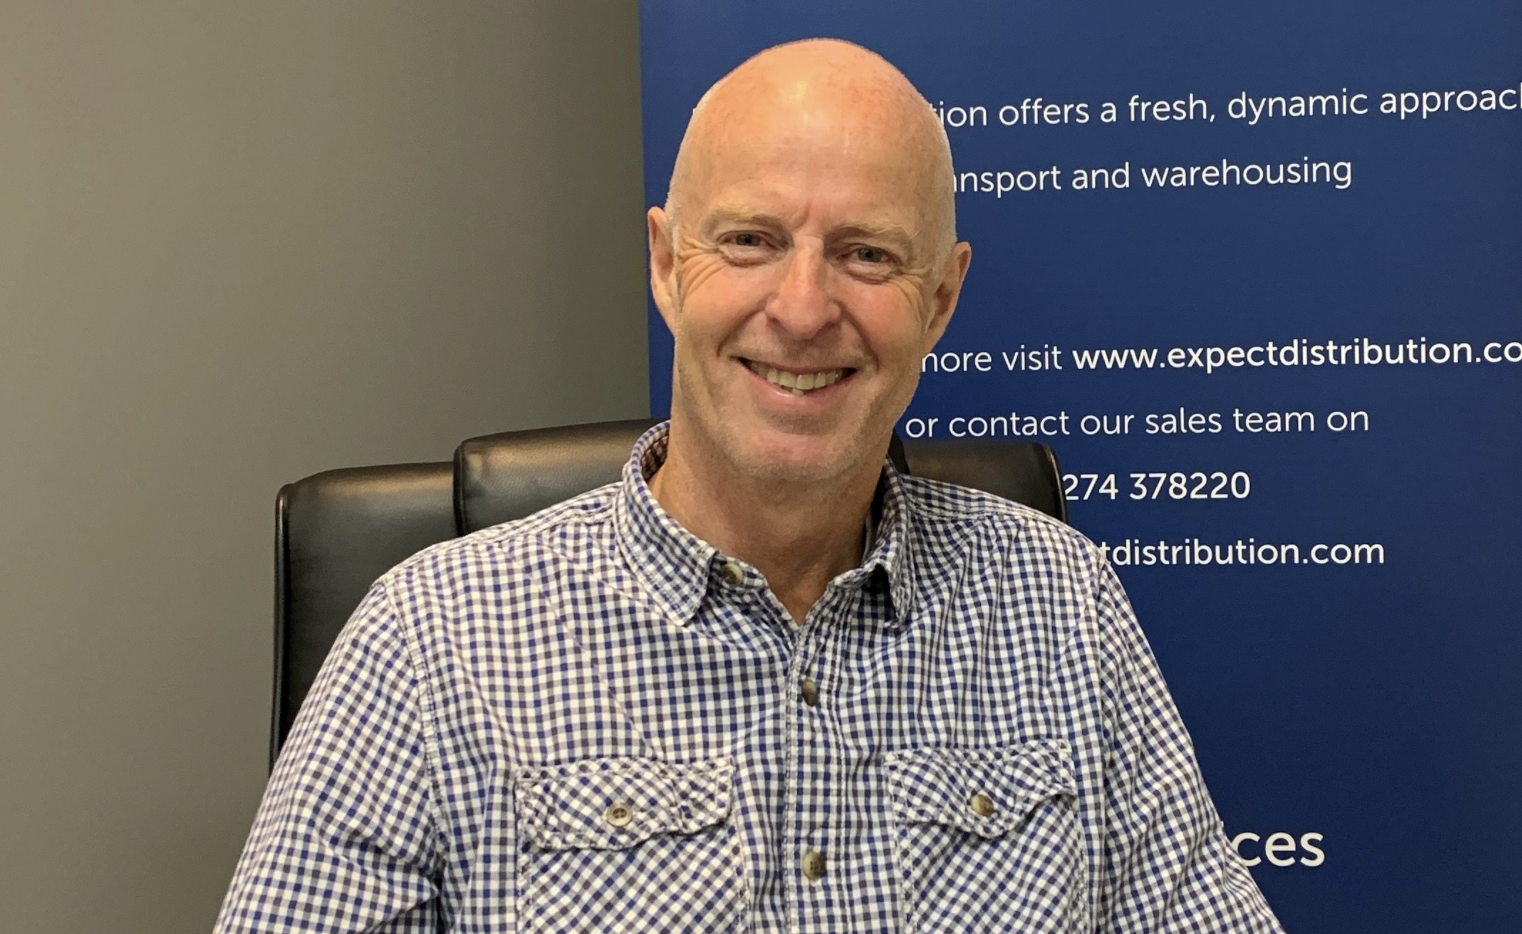 Expect Distribution welcomes Andy Hague as head of transport